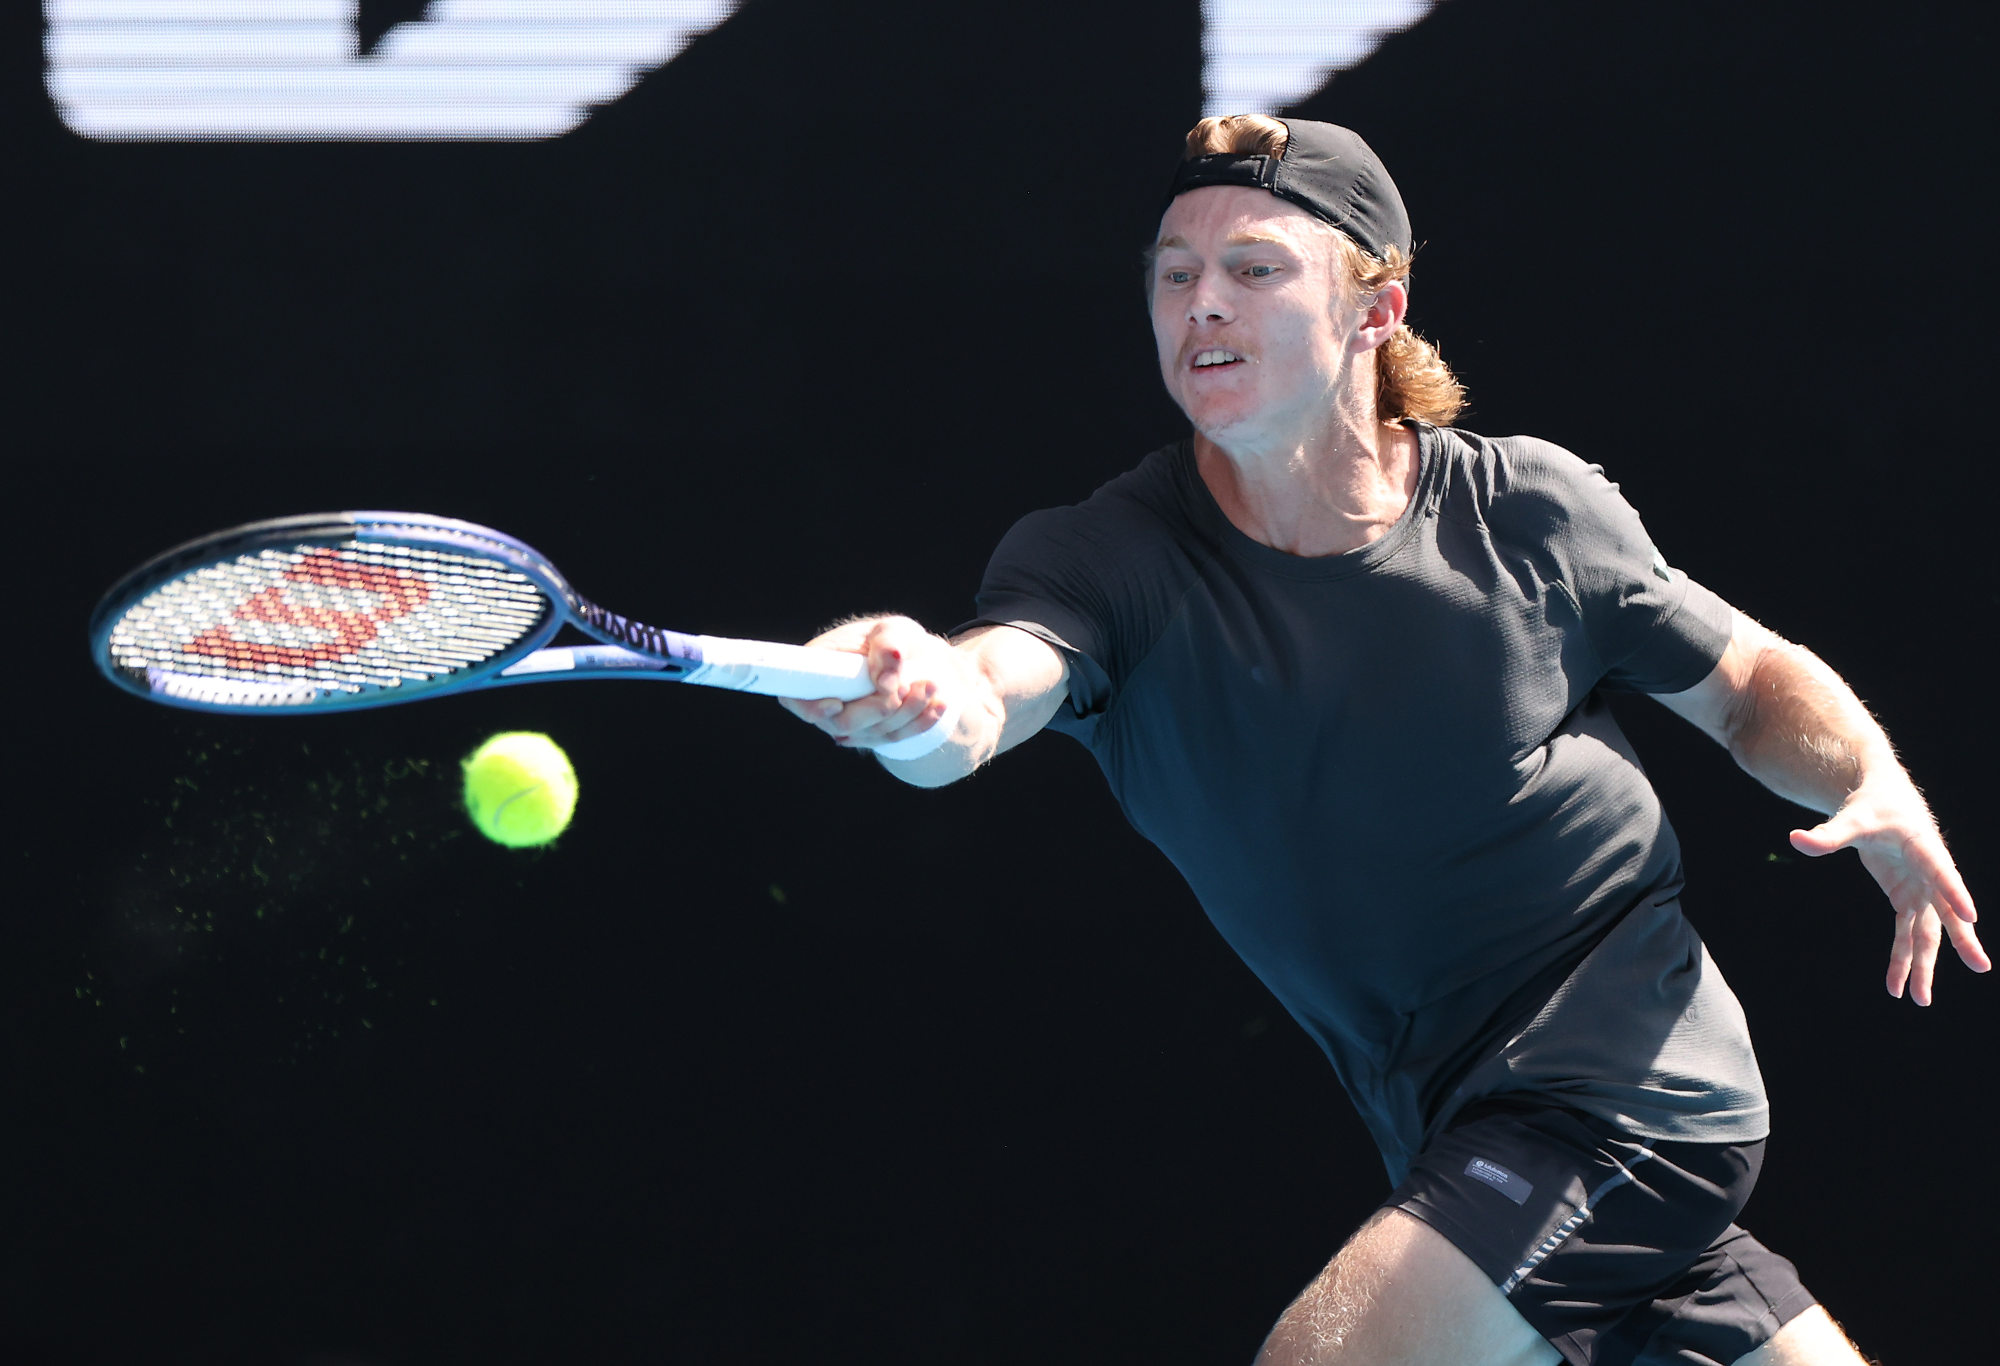 Dane Sweeney during his Australian Open first round loss to Francisco Cerundolo.